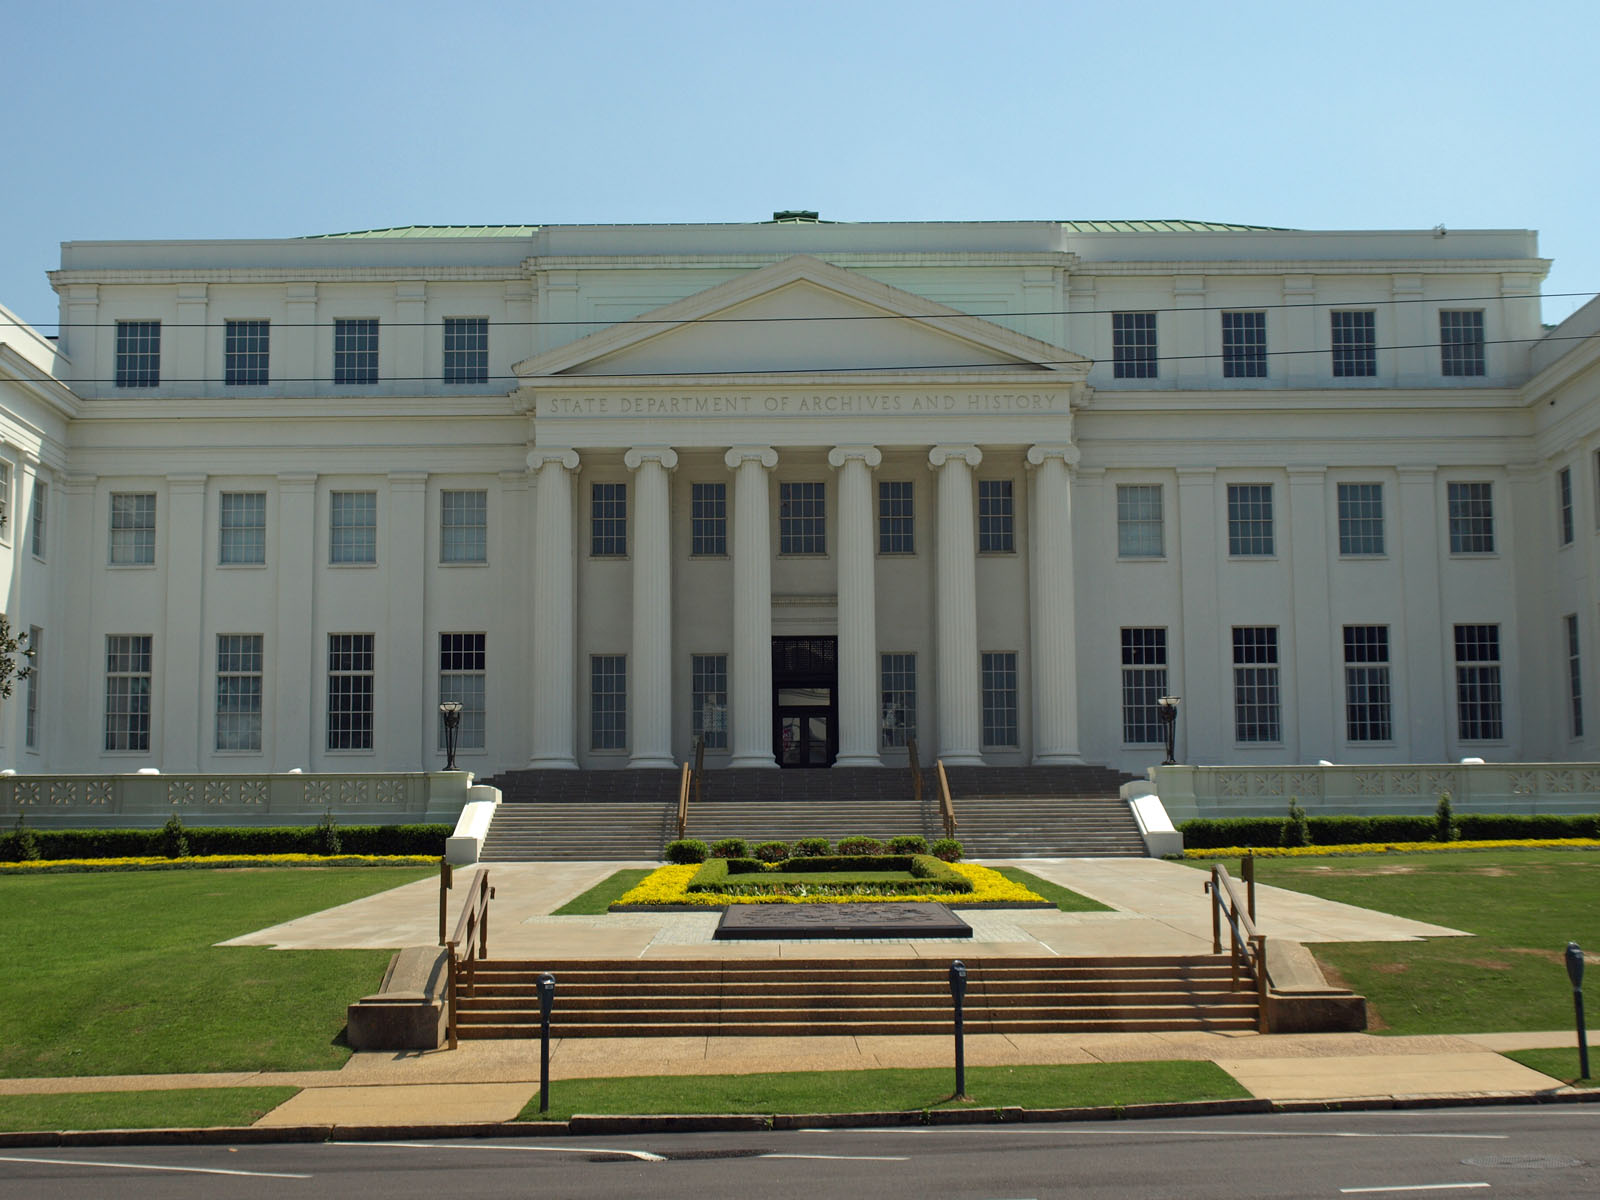 The Alabama Department of Archives and History in Montgomery, Ala., photographed in April 2009. During the week of August 8, the institution announced it had begun the process of returning Native American remains and funerary objects to the tribes from which they came, in accordance with federal law. Image courtesy of Wikimedia Commons, photo credit Chris Pruitt. Shared under the Creative Commons Attribution-Share Alike 3.0 Unported license.